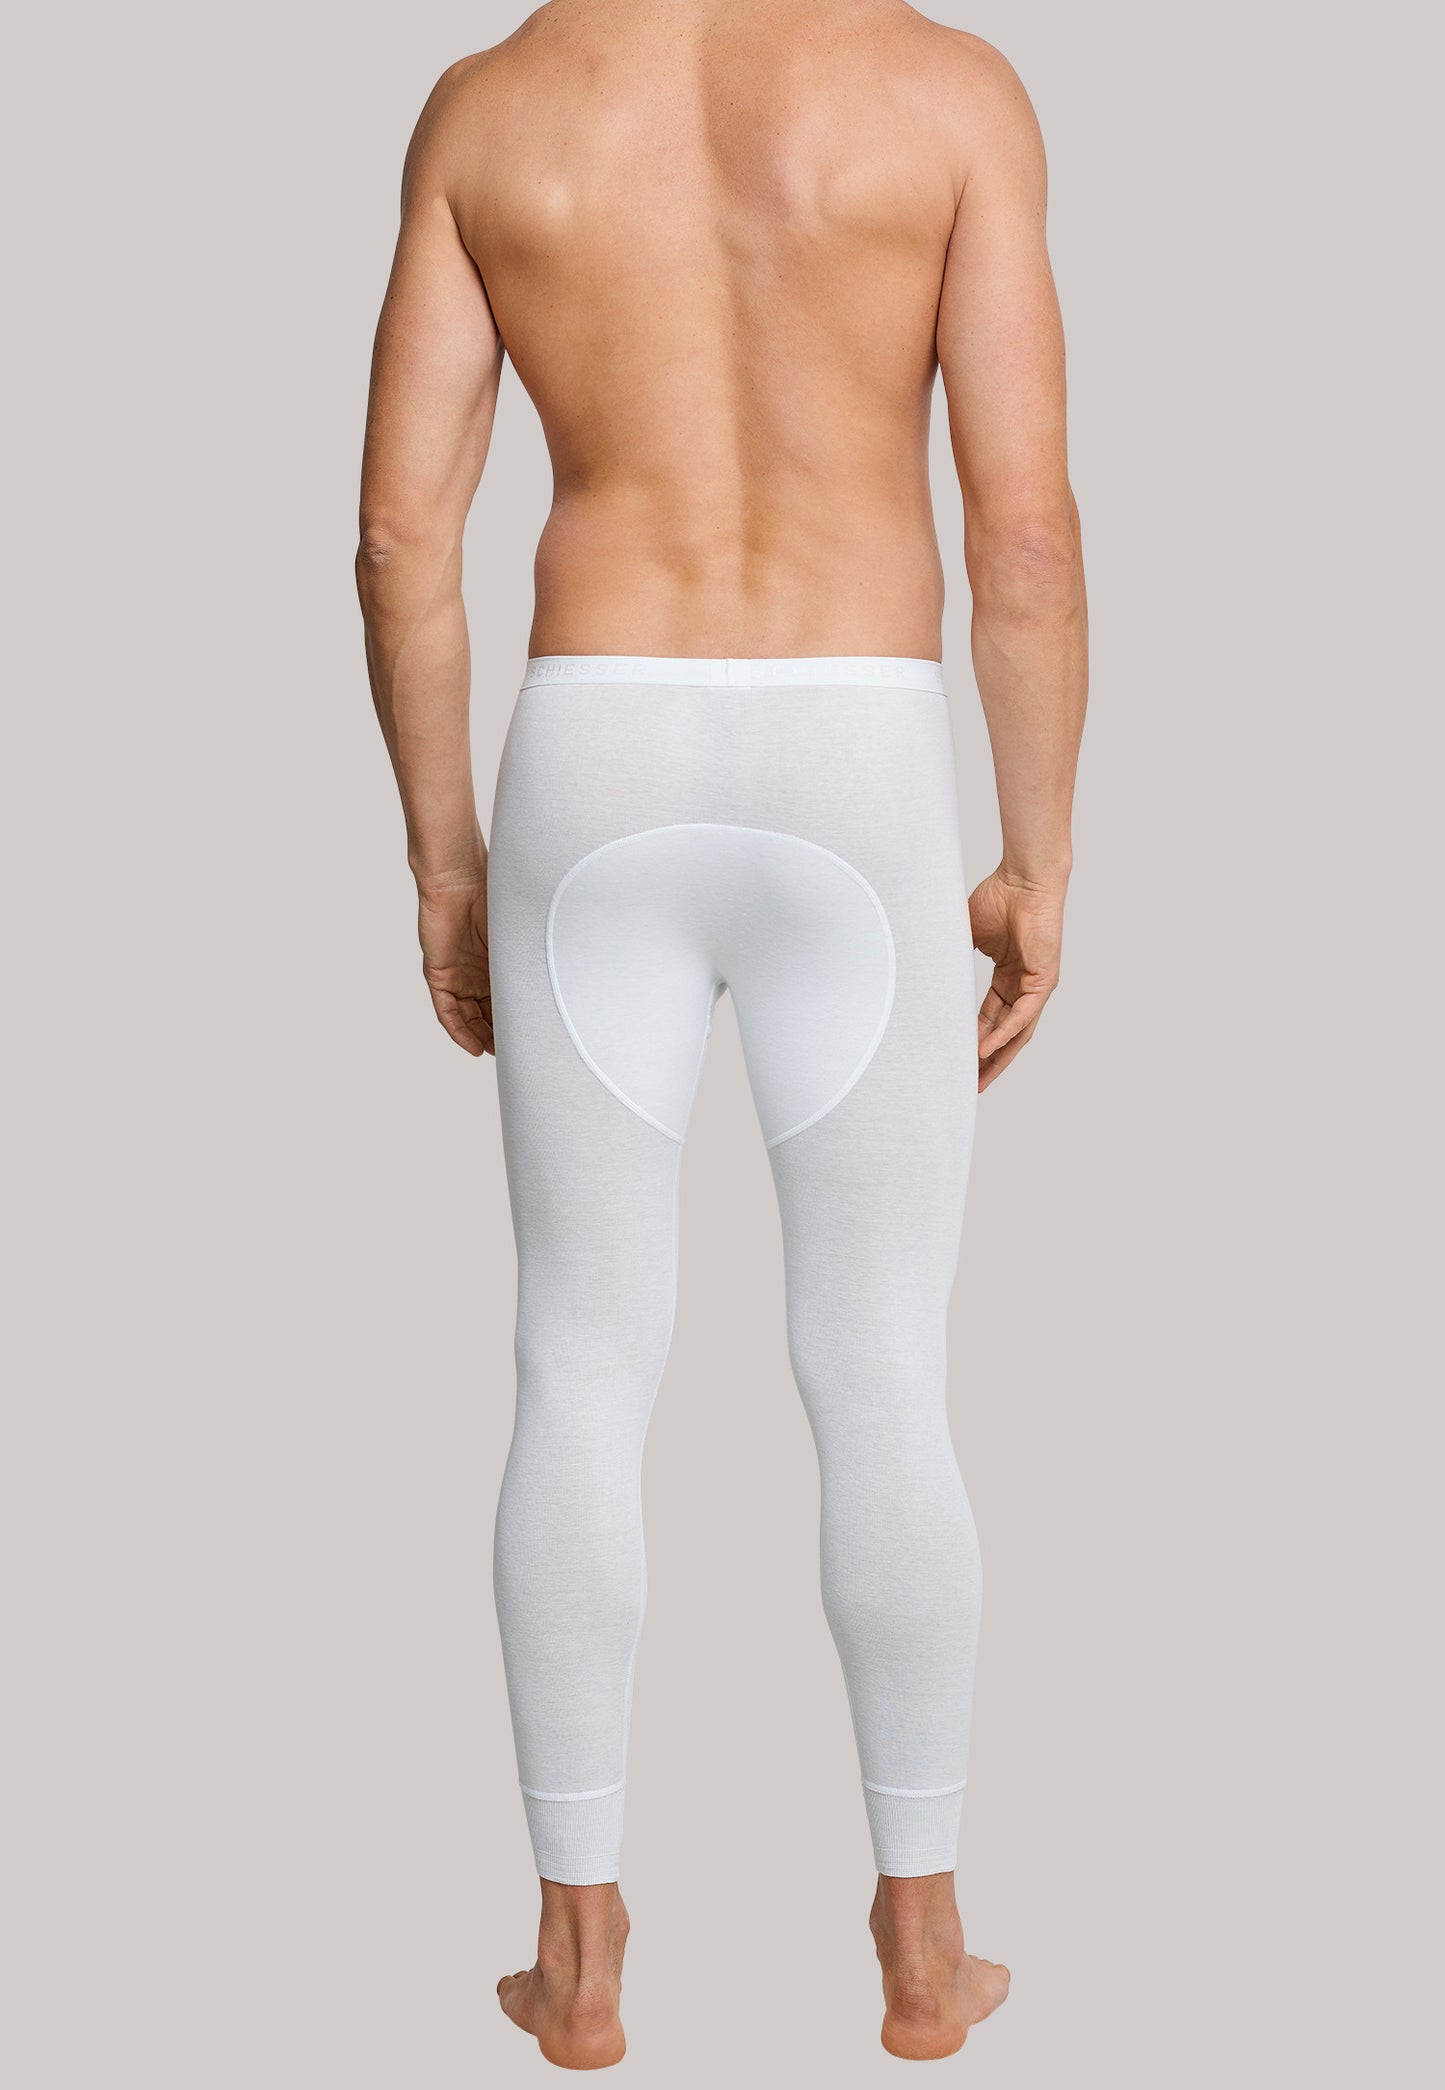 Long underpants with fly, white - Original Feinripp